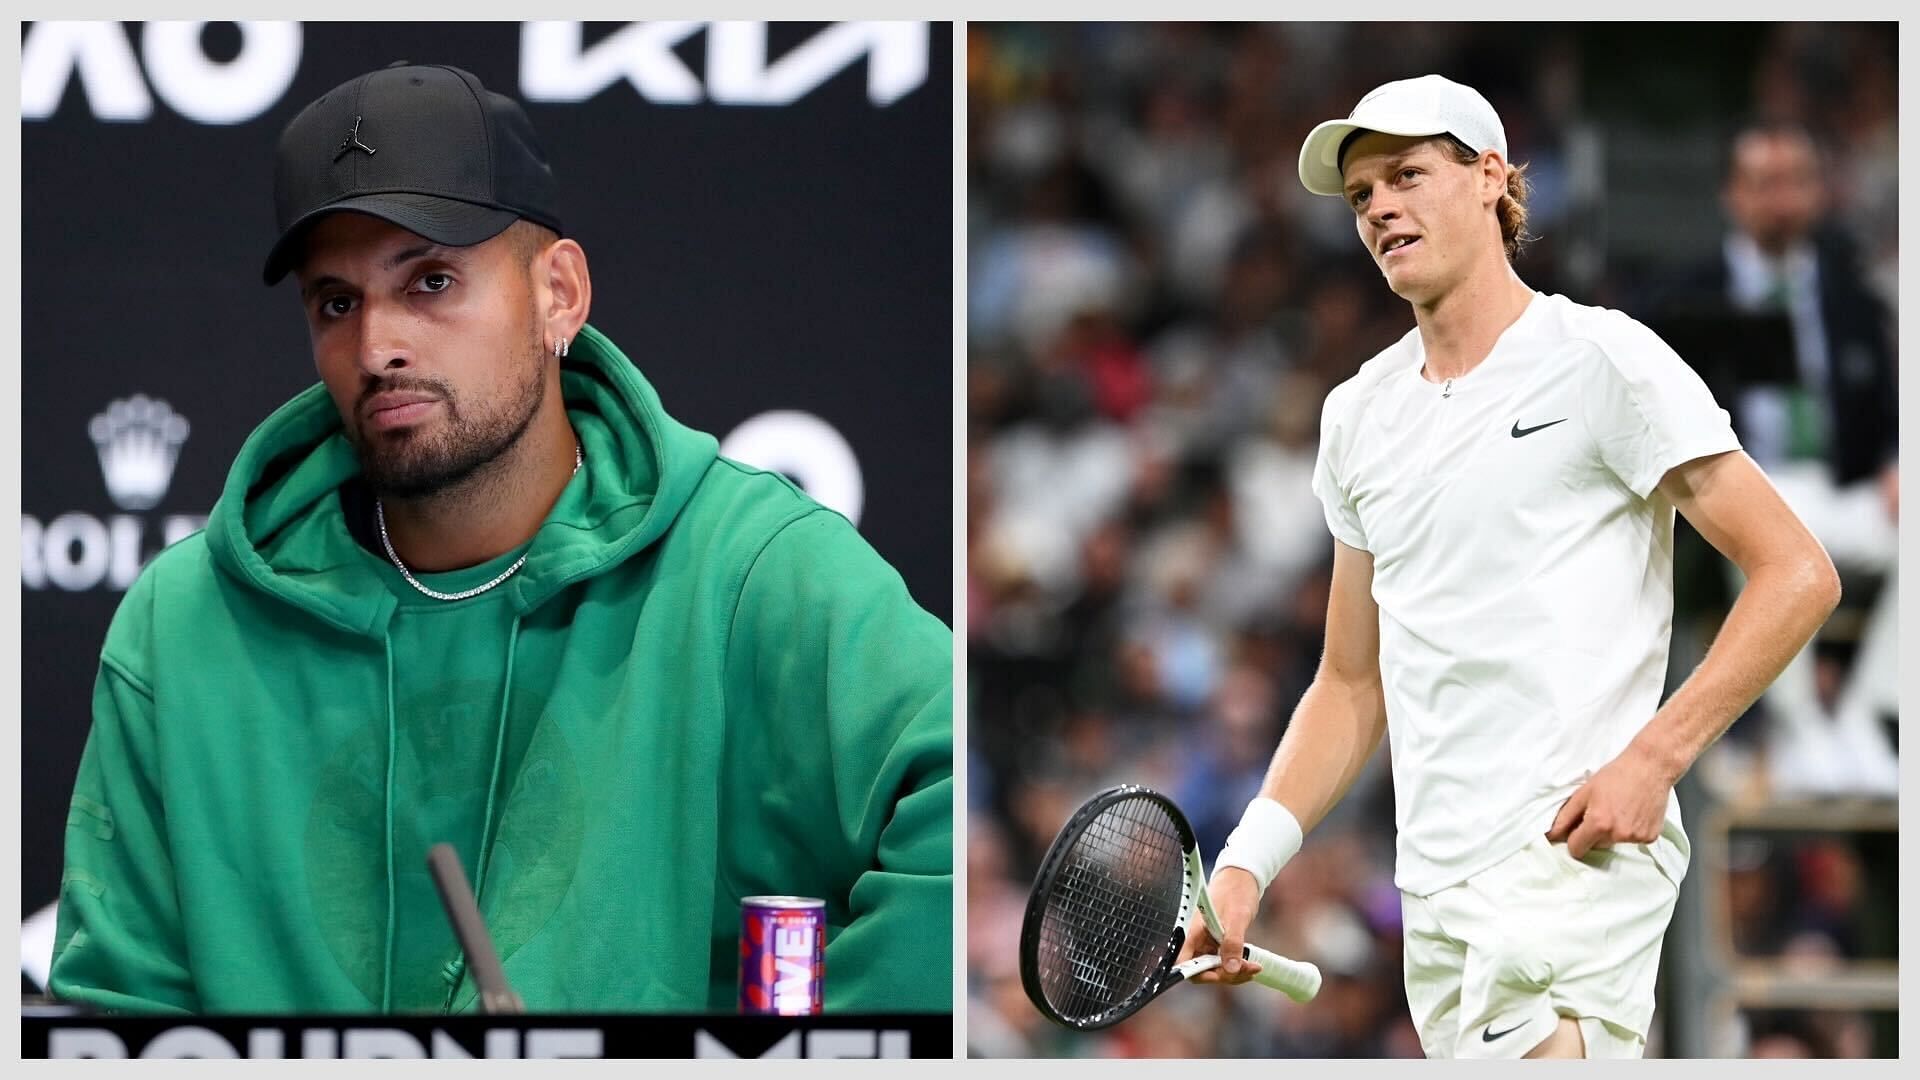 Nick Kyrgios reacts to sight of empty seats during Jannik Sinner